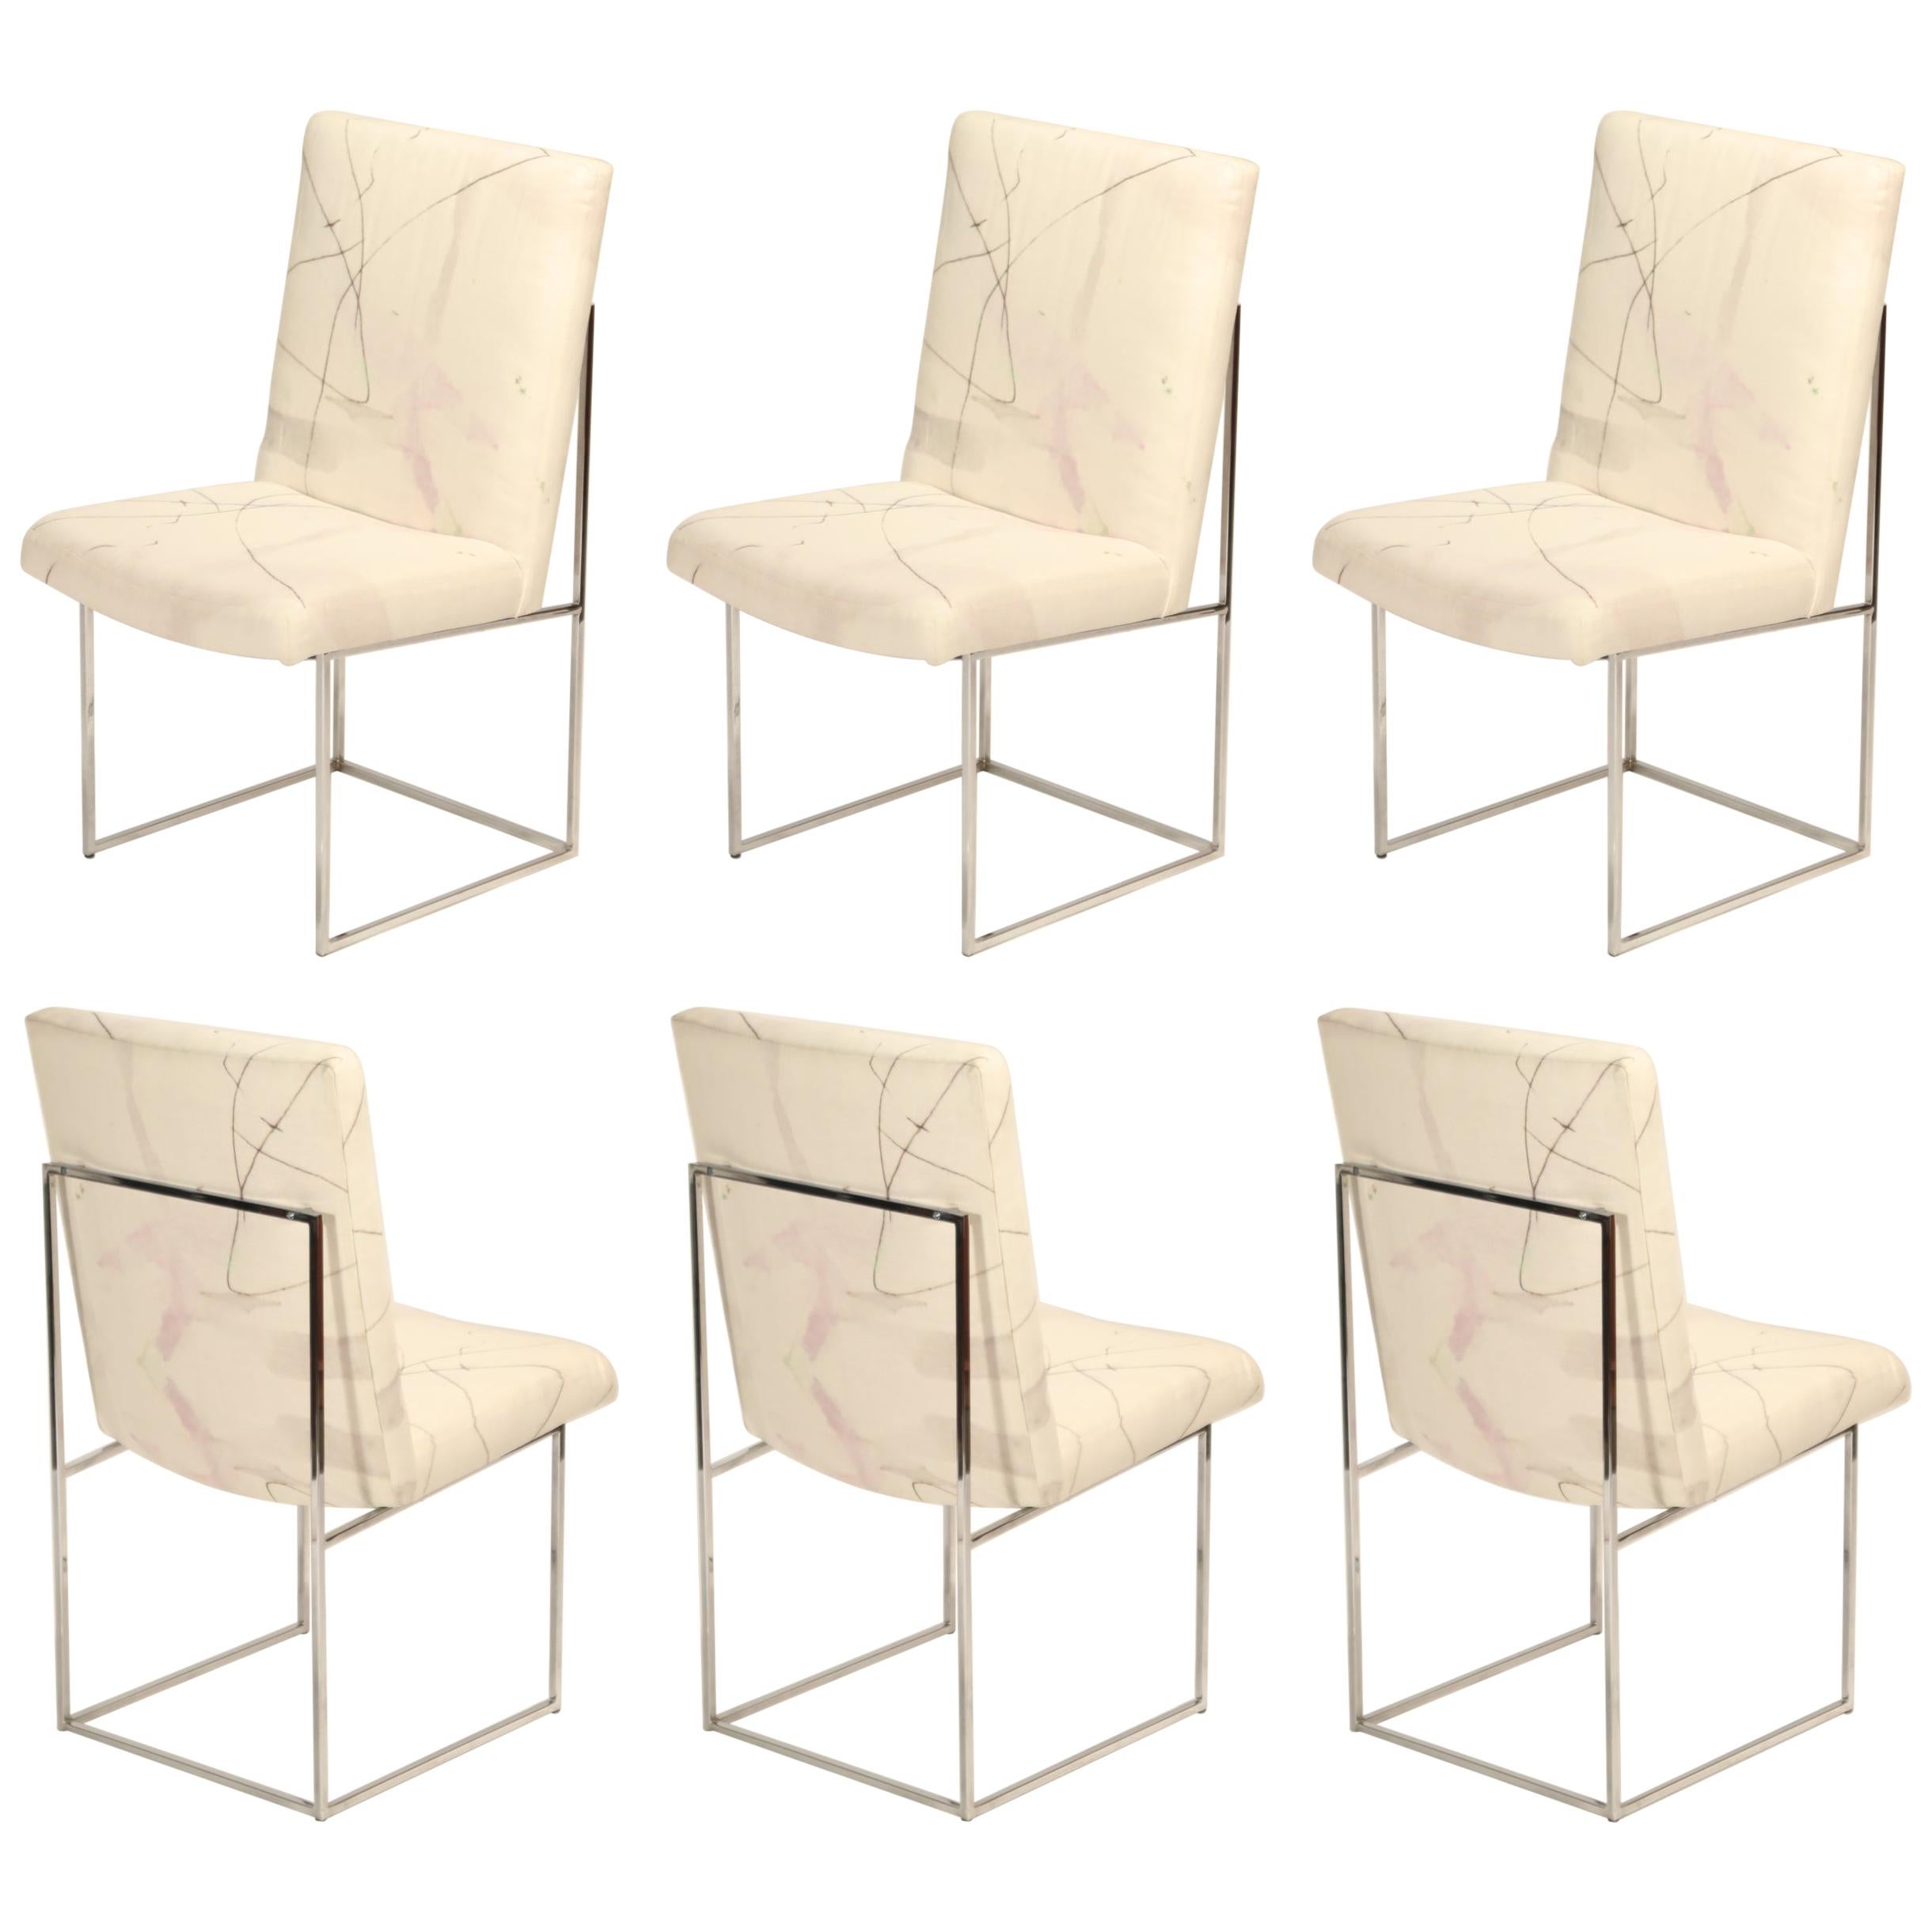 Set of Six Chrome Dining Chairs by Milo Baughman for Thayer Coggin, circa 1970